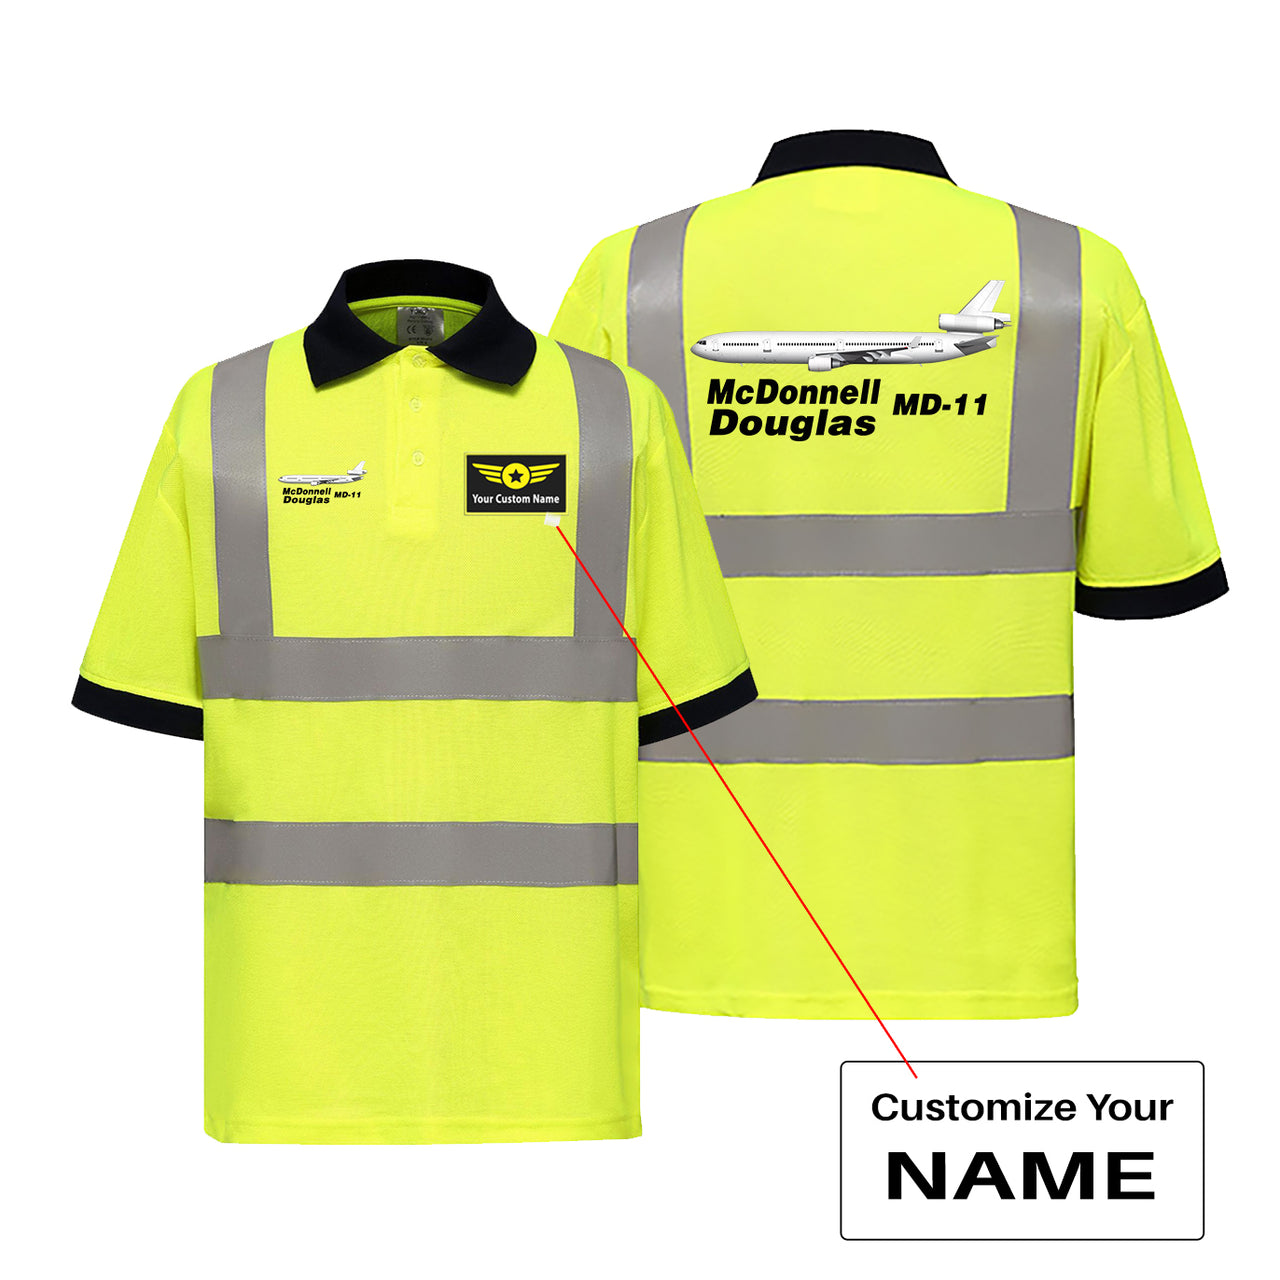 The McDonnell Douglas MD-11 Designed Reflective Polo T-Shirts